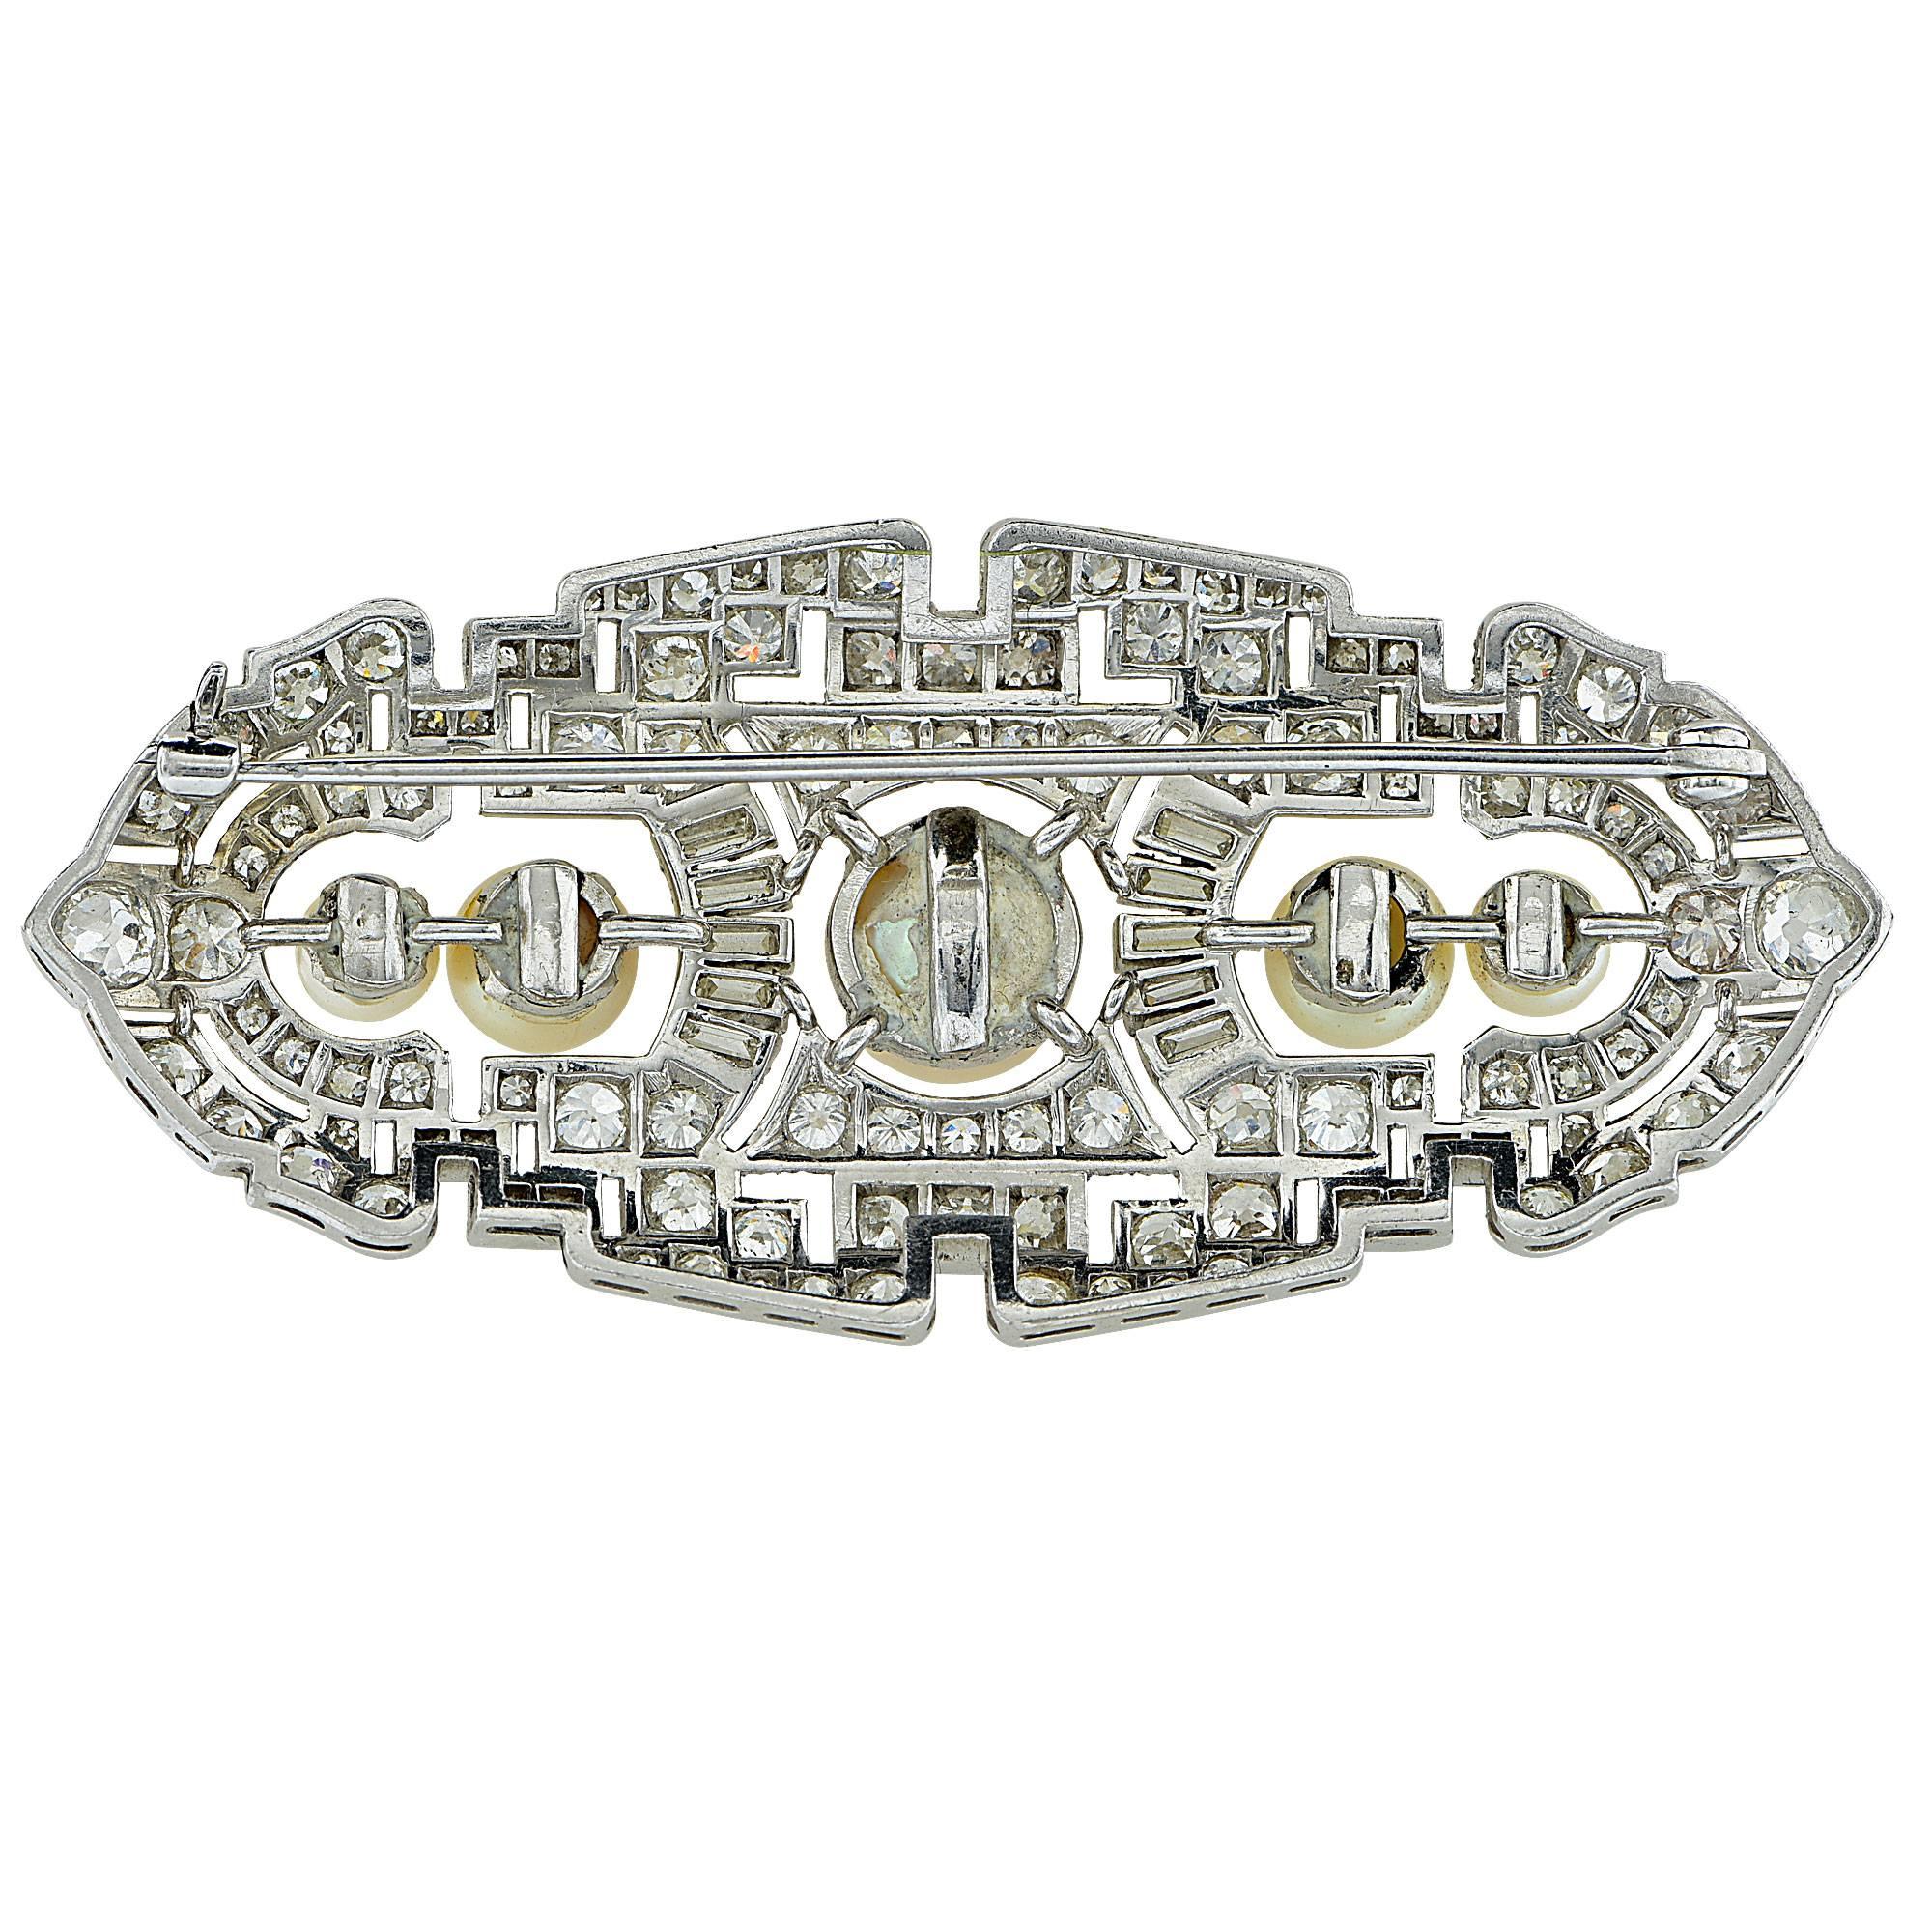 Platinum Art Deco brooch featuring 124 old European cut and baguette cut diamonds weighing approximately 6cts total, G color, VS clarity.

Metal weight: 21 grams

This diamond ring is accompanied by a retail appraisal performed by a GIA Graduate